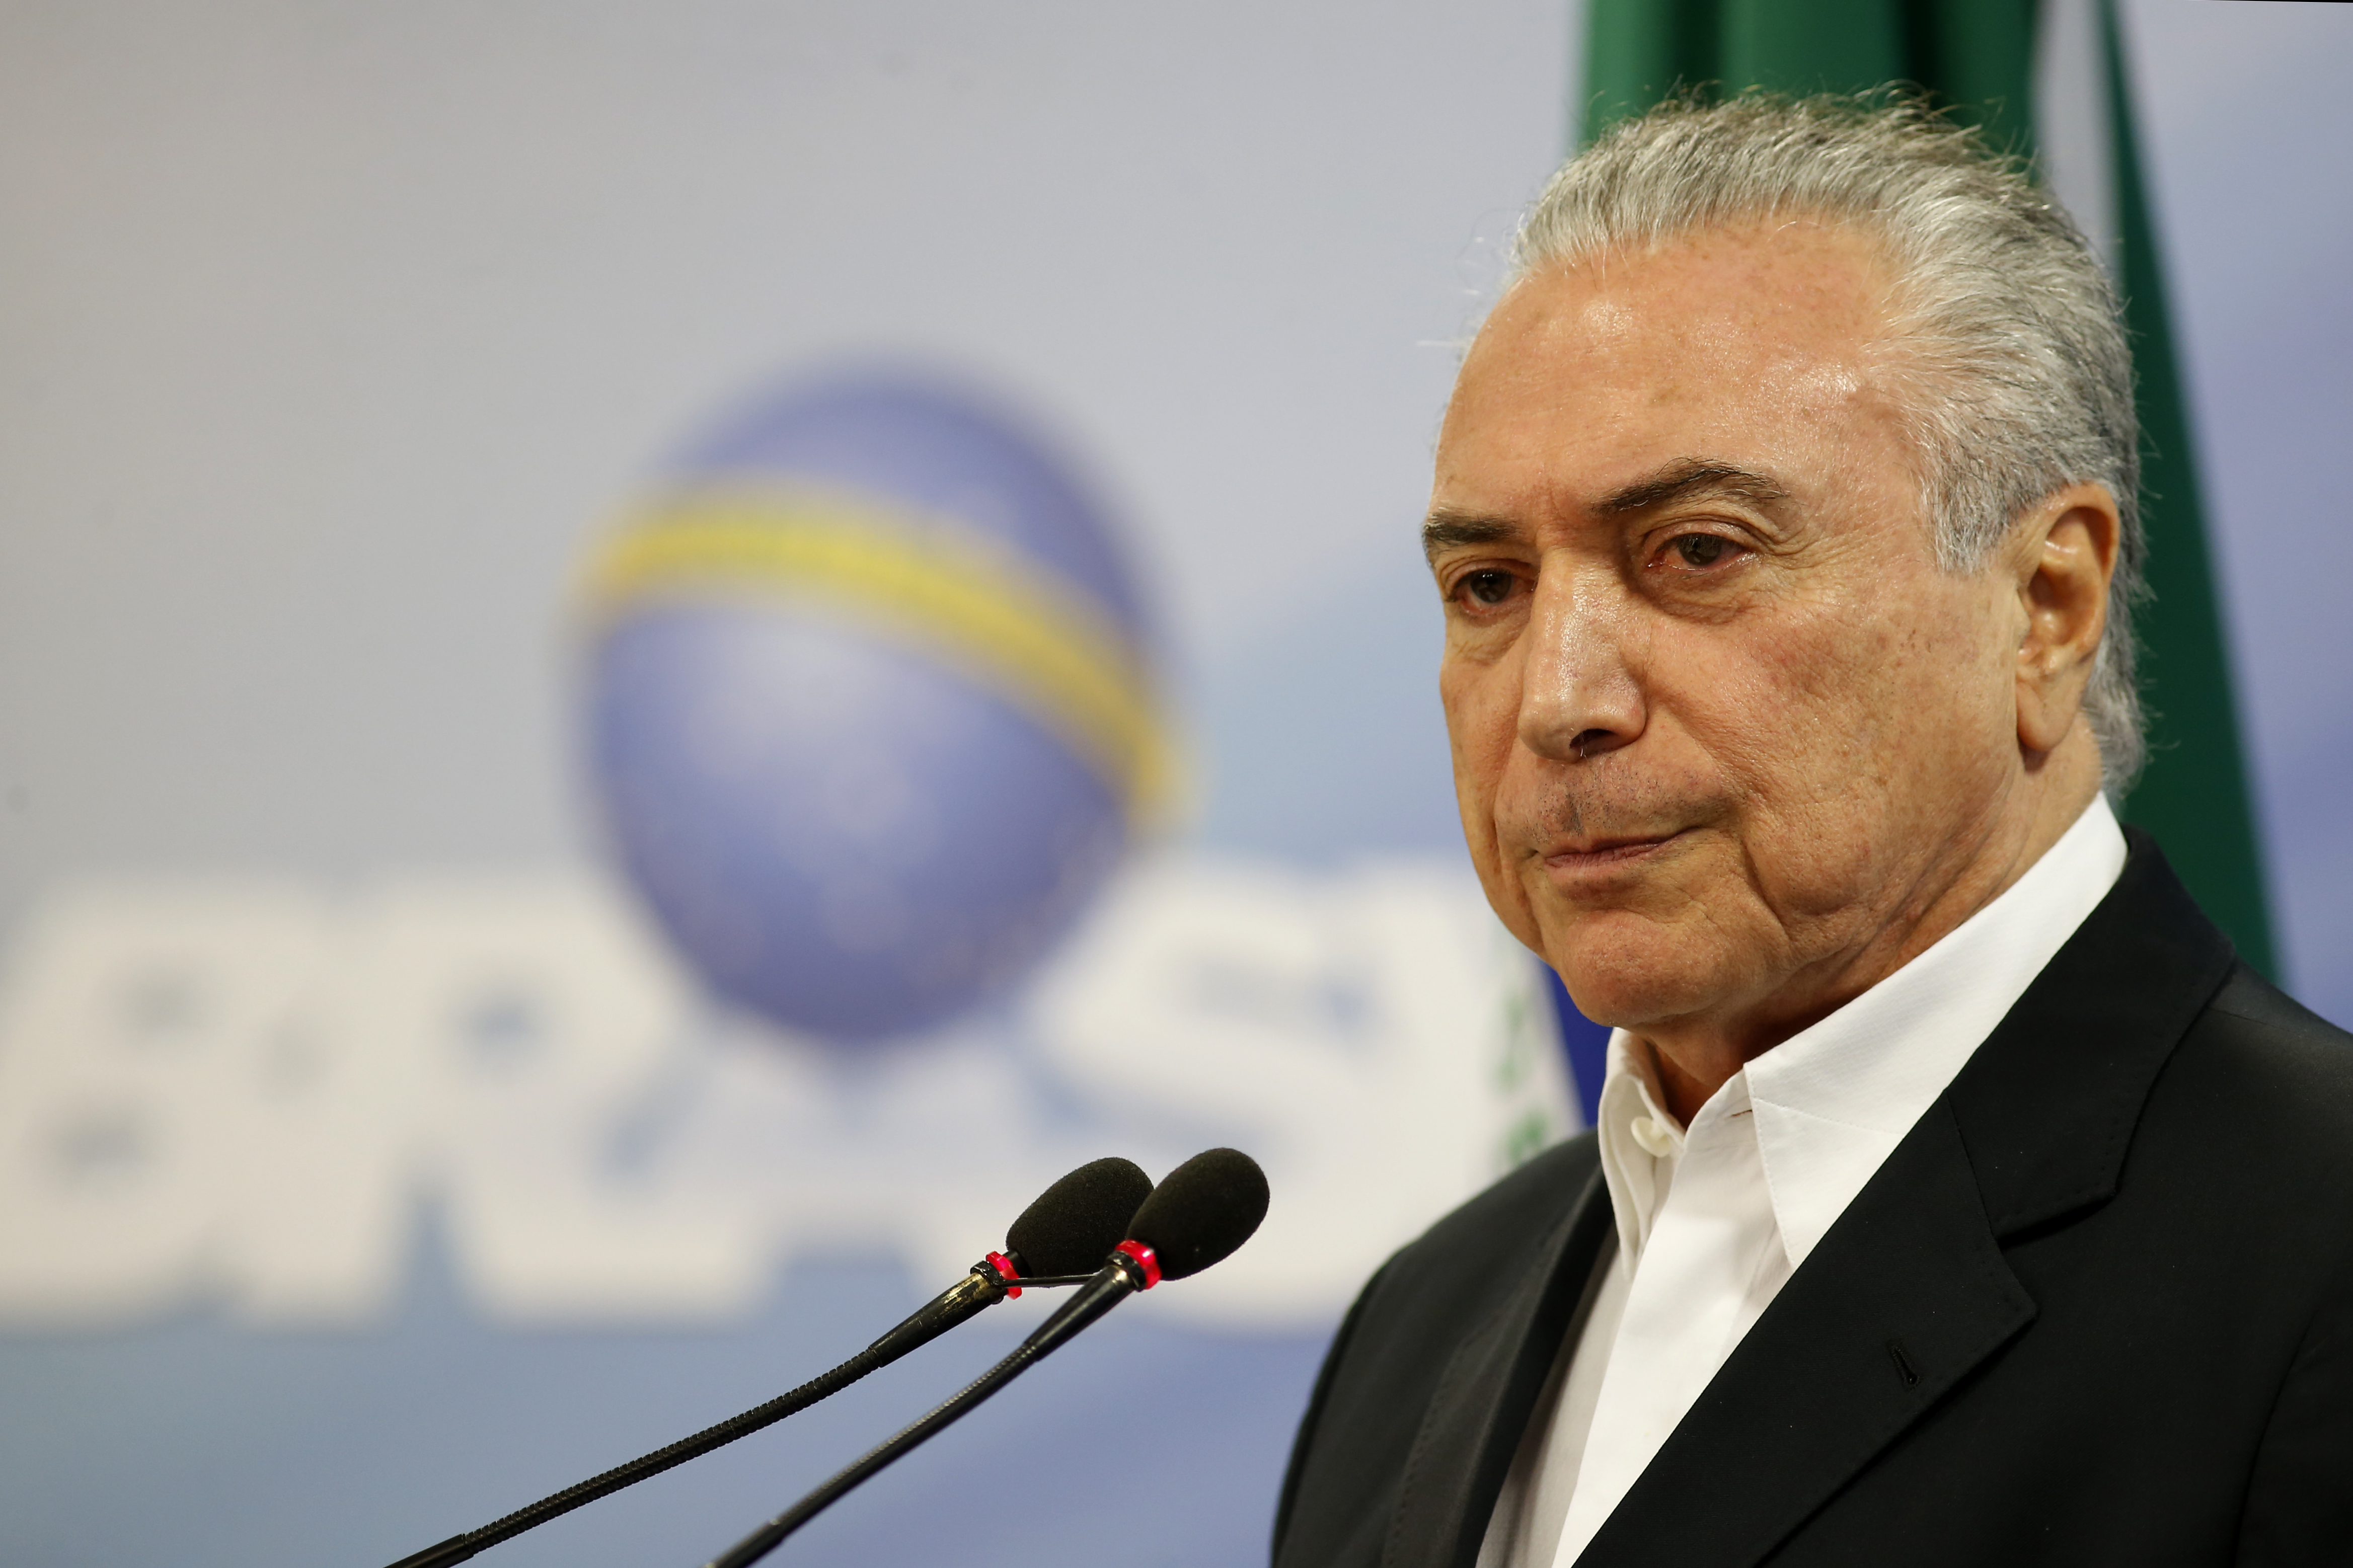 Michel Temer delivers a new statement following the release of a tape allegedly demonstrating him condoning bribery payments to Chamber of Deputies President Eduardo Cunha on May 20, 2017 in Brasilia, Brazil. (Igo Estrela—Getty Images)